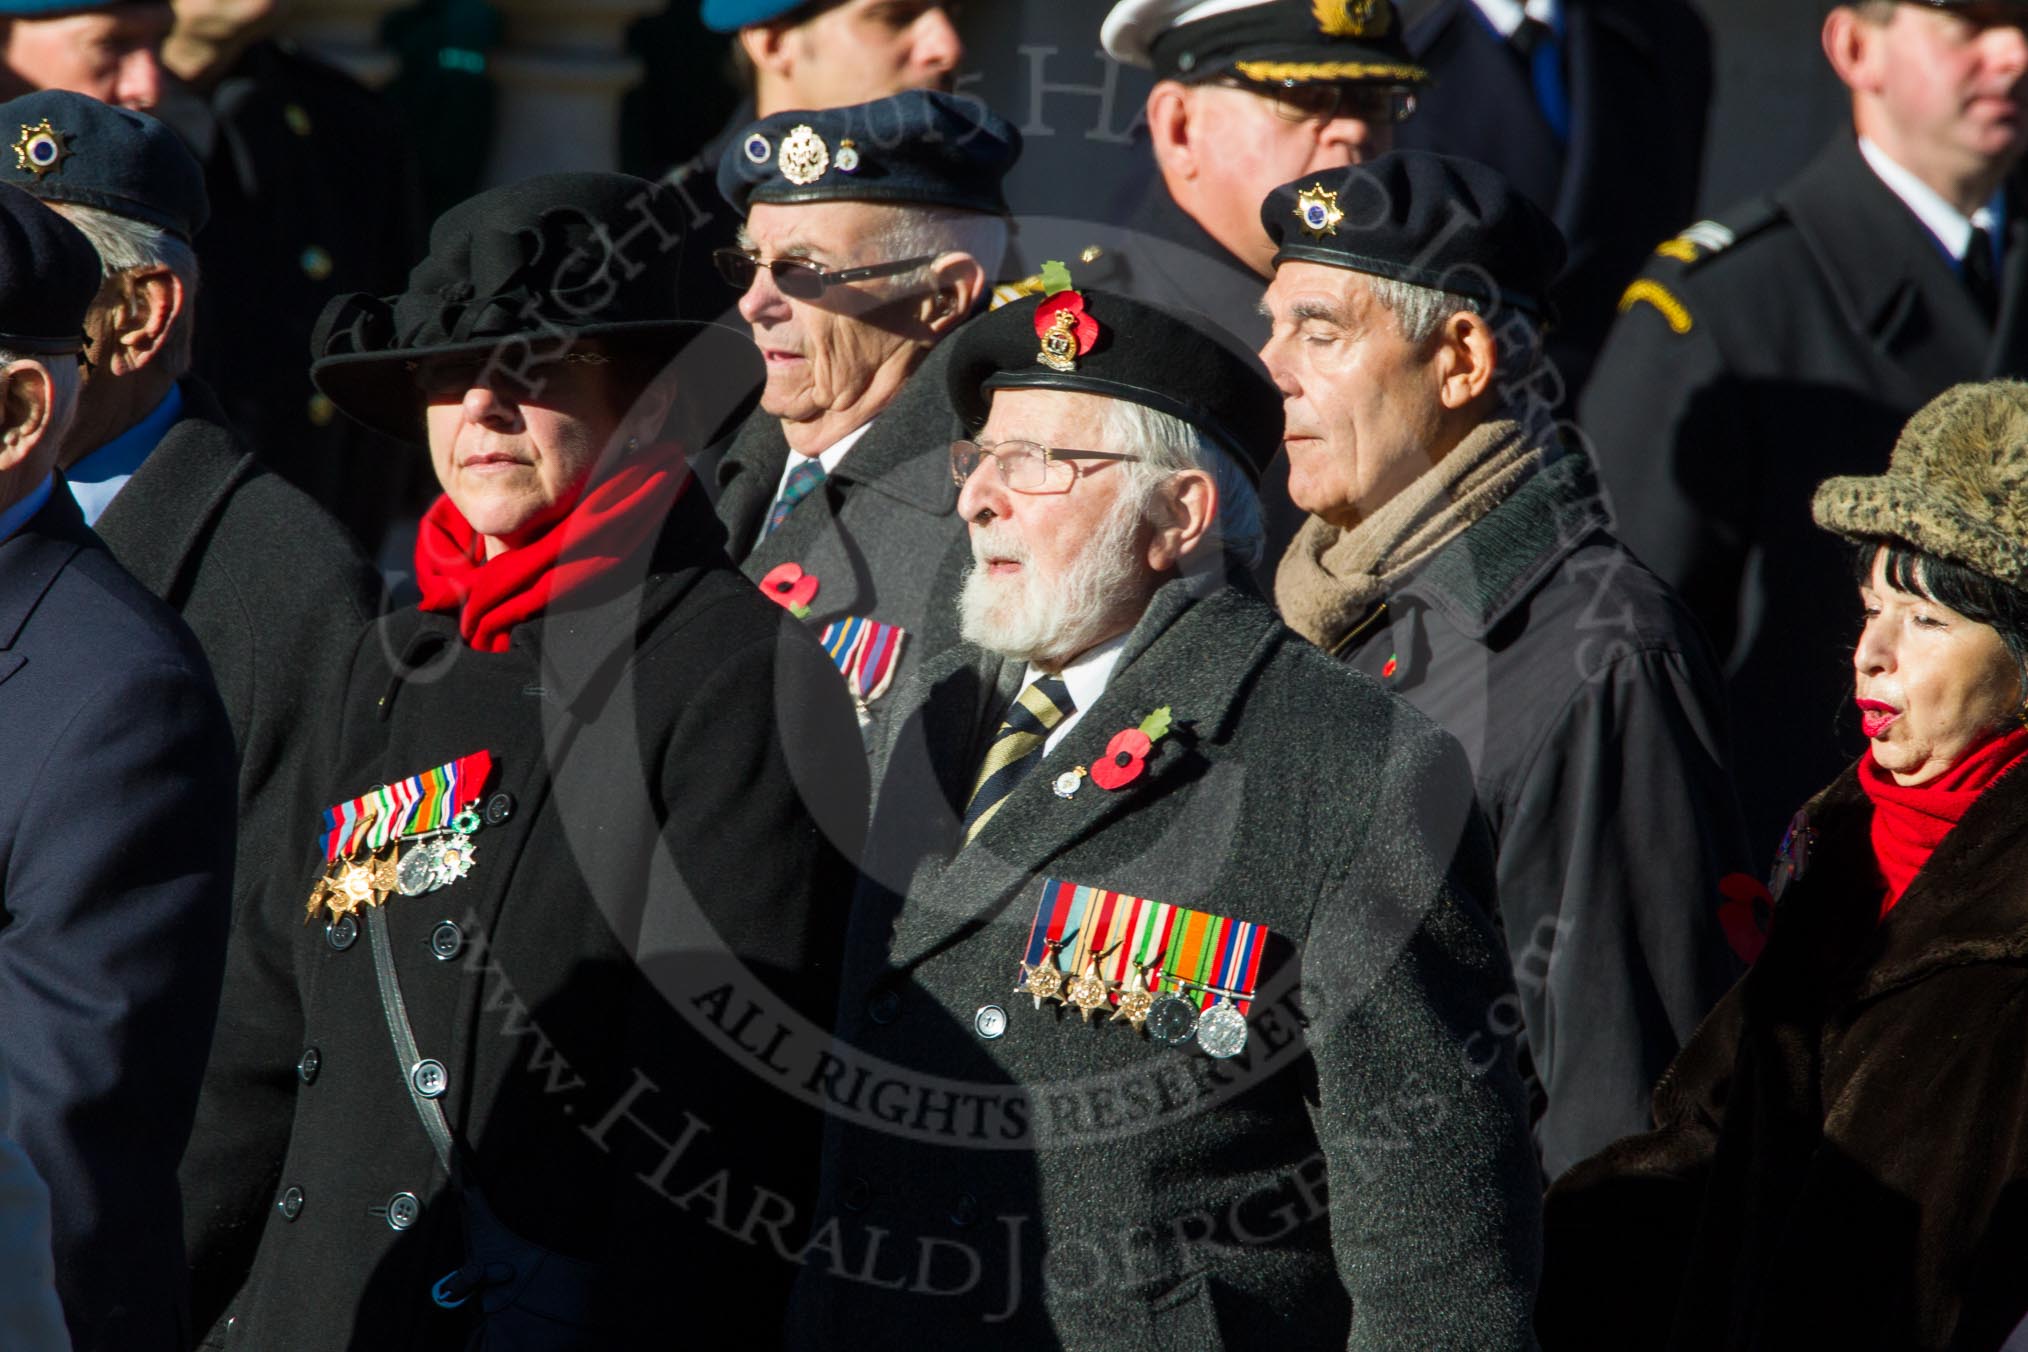 Remembrance Sunday Cenotaph March Past 2013: D26 - Association of Jewish Ex-Servicemen & Women..
Press stand opposite the Foreign Office building, Whitehall, London SW1,
London,
Greater London,
United Kingdom,
on 10 November 2013 at 11:41, image #209